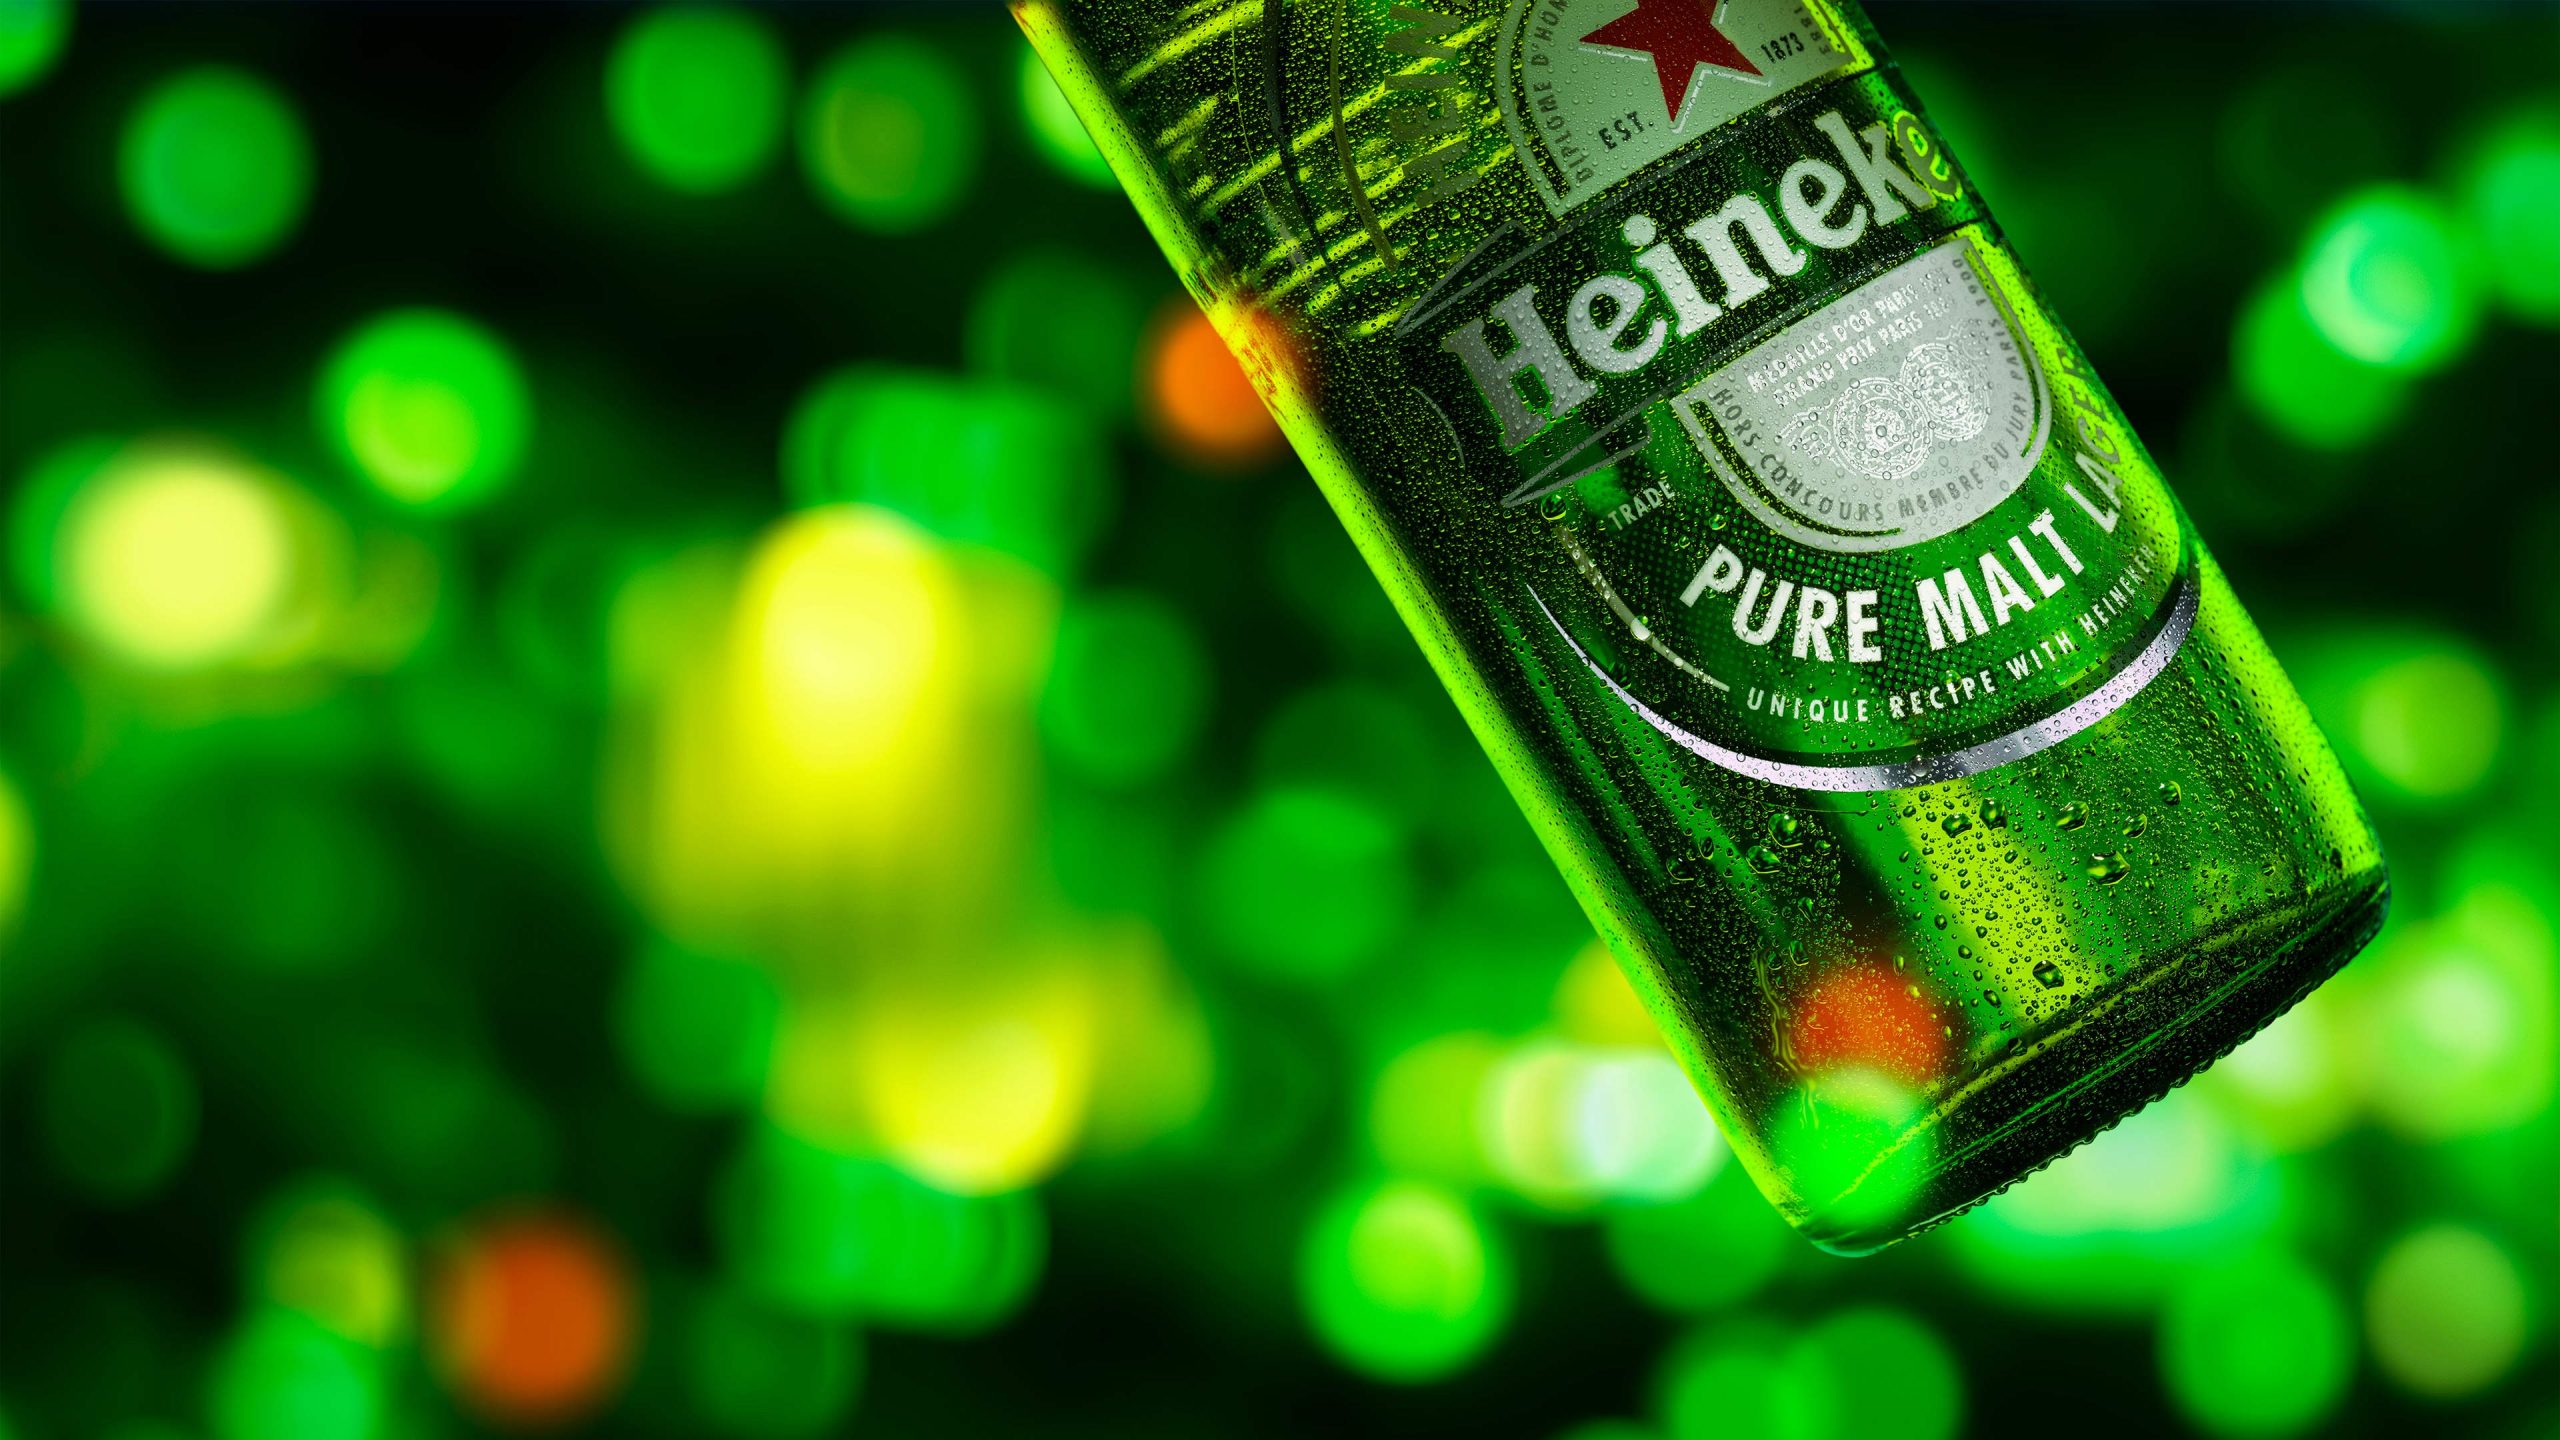 How Heineken is Driving Connections with Azure AI Services